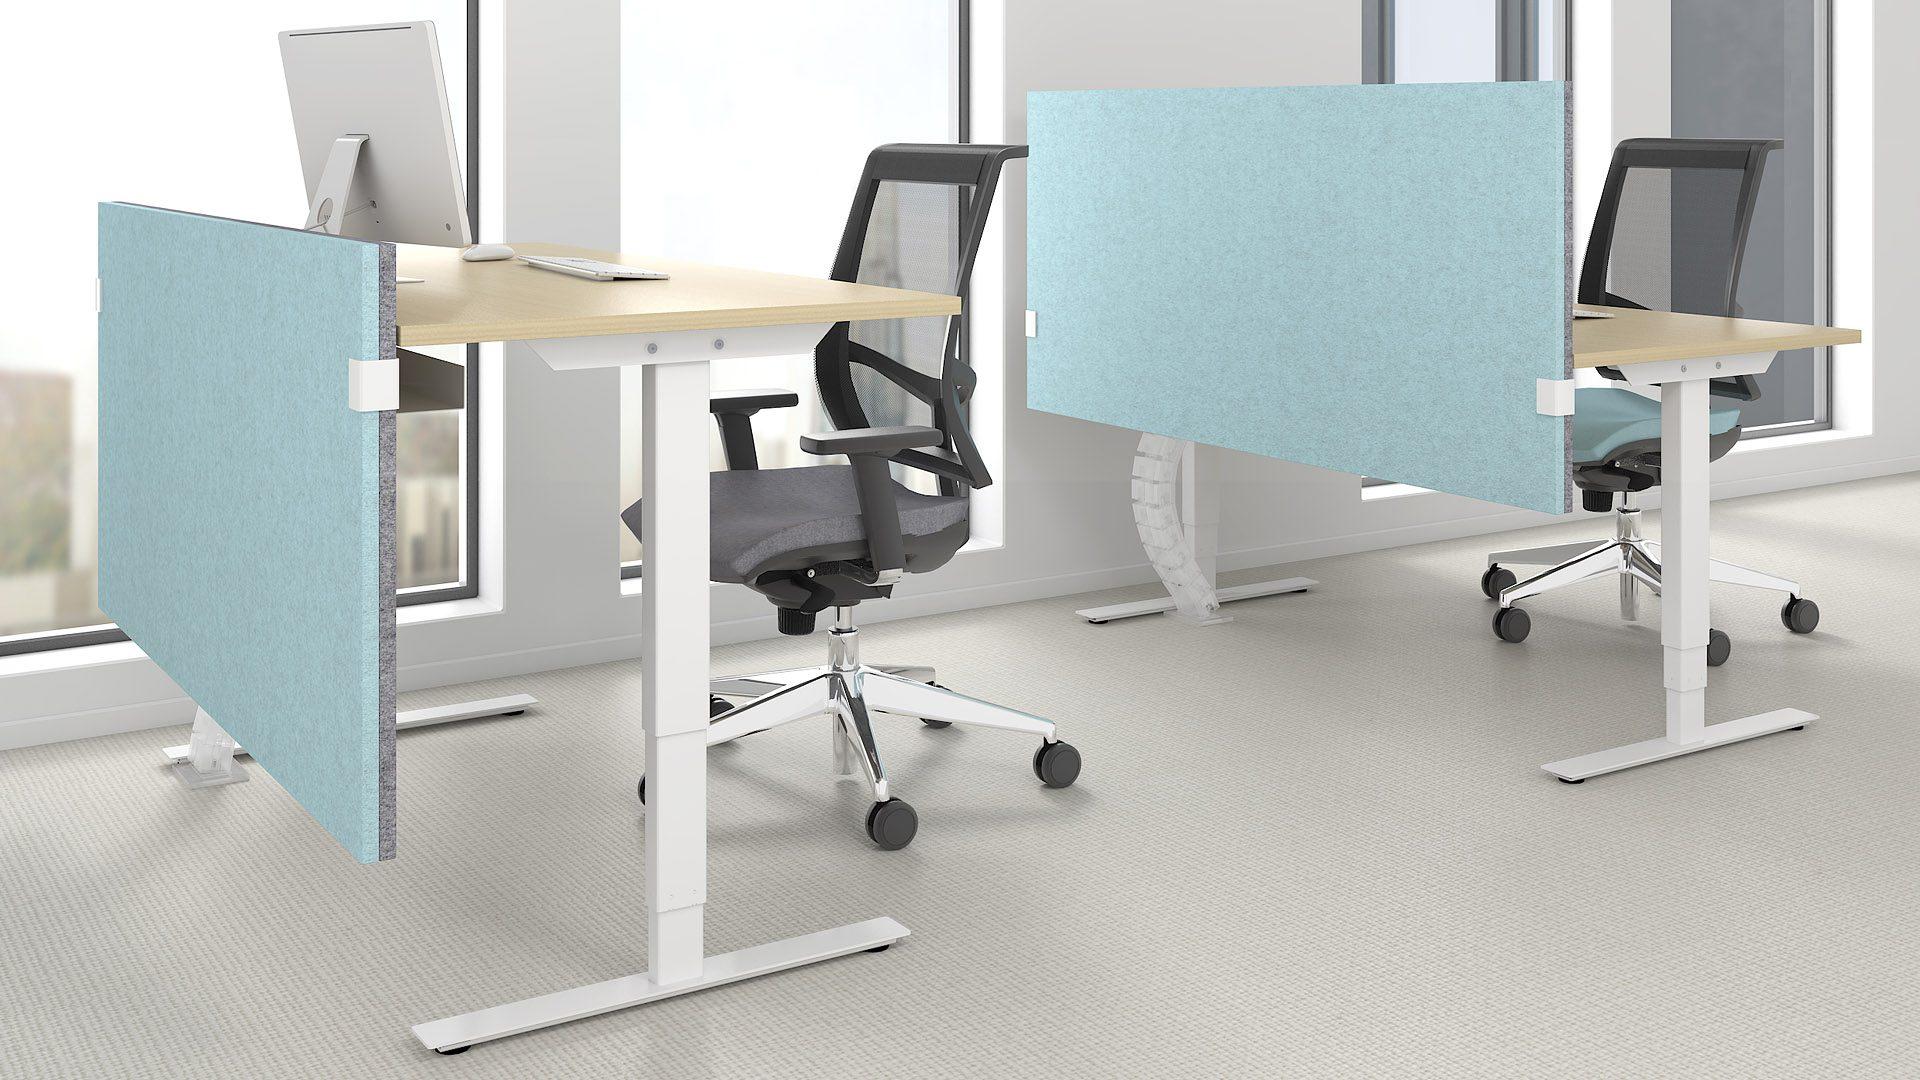 Eva II task chairs with Easy sit/stand desks and Modus screens